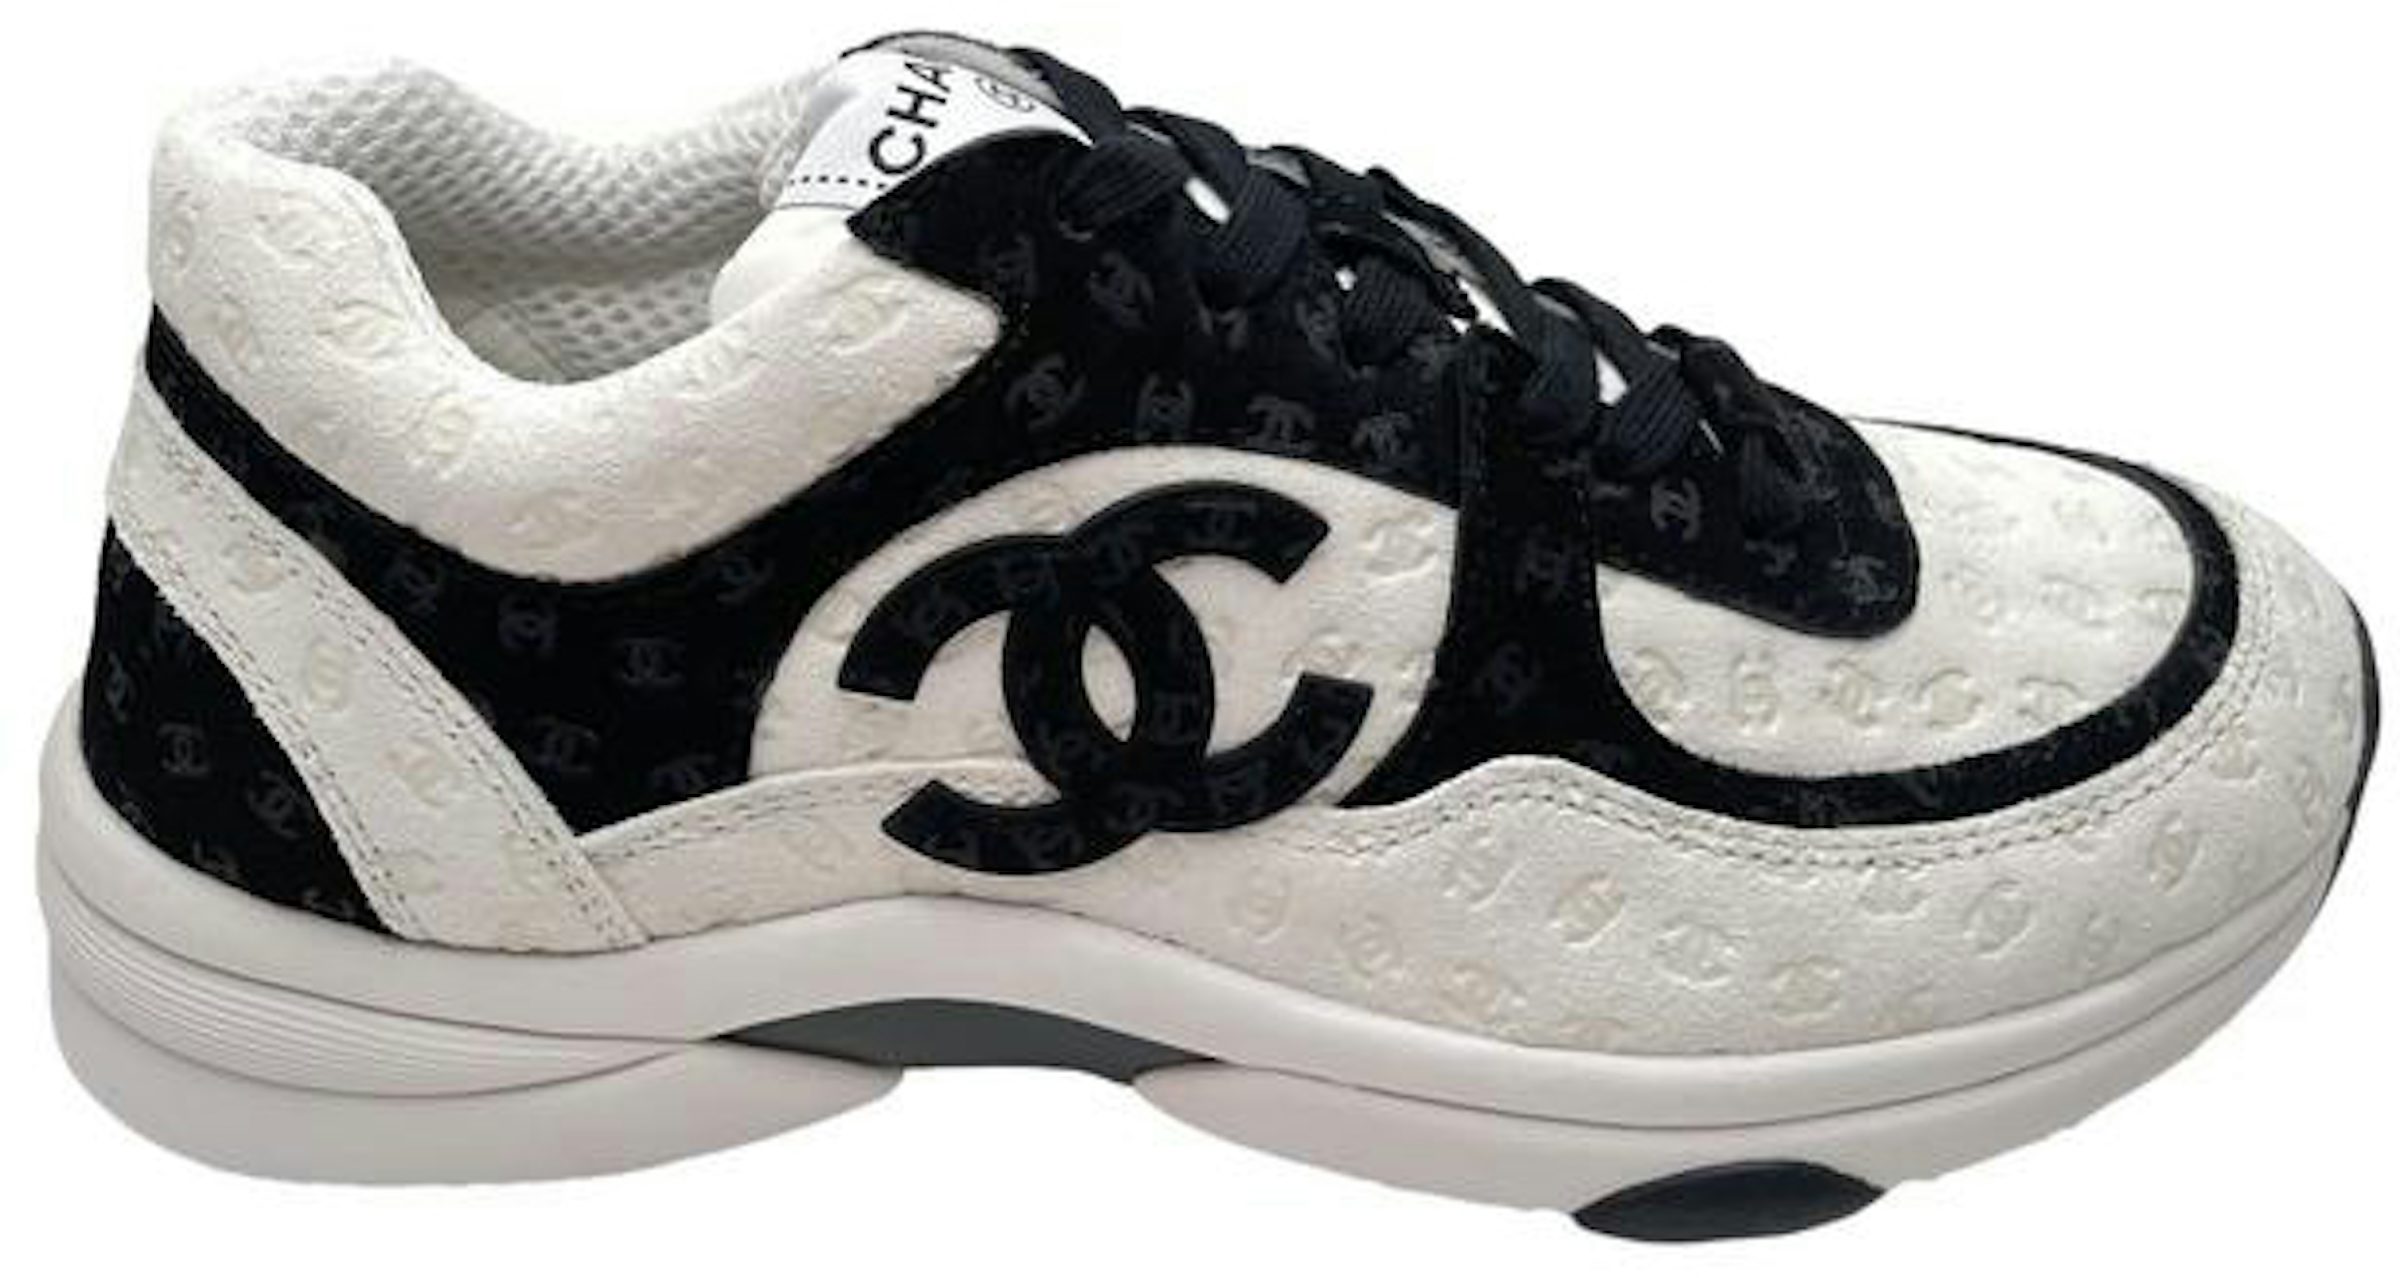 chanel shoes boys